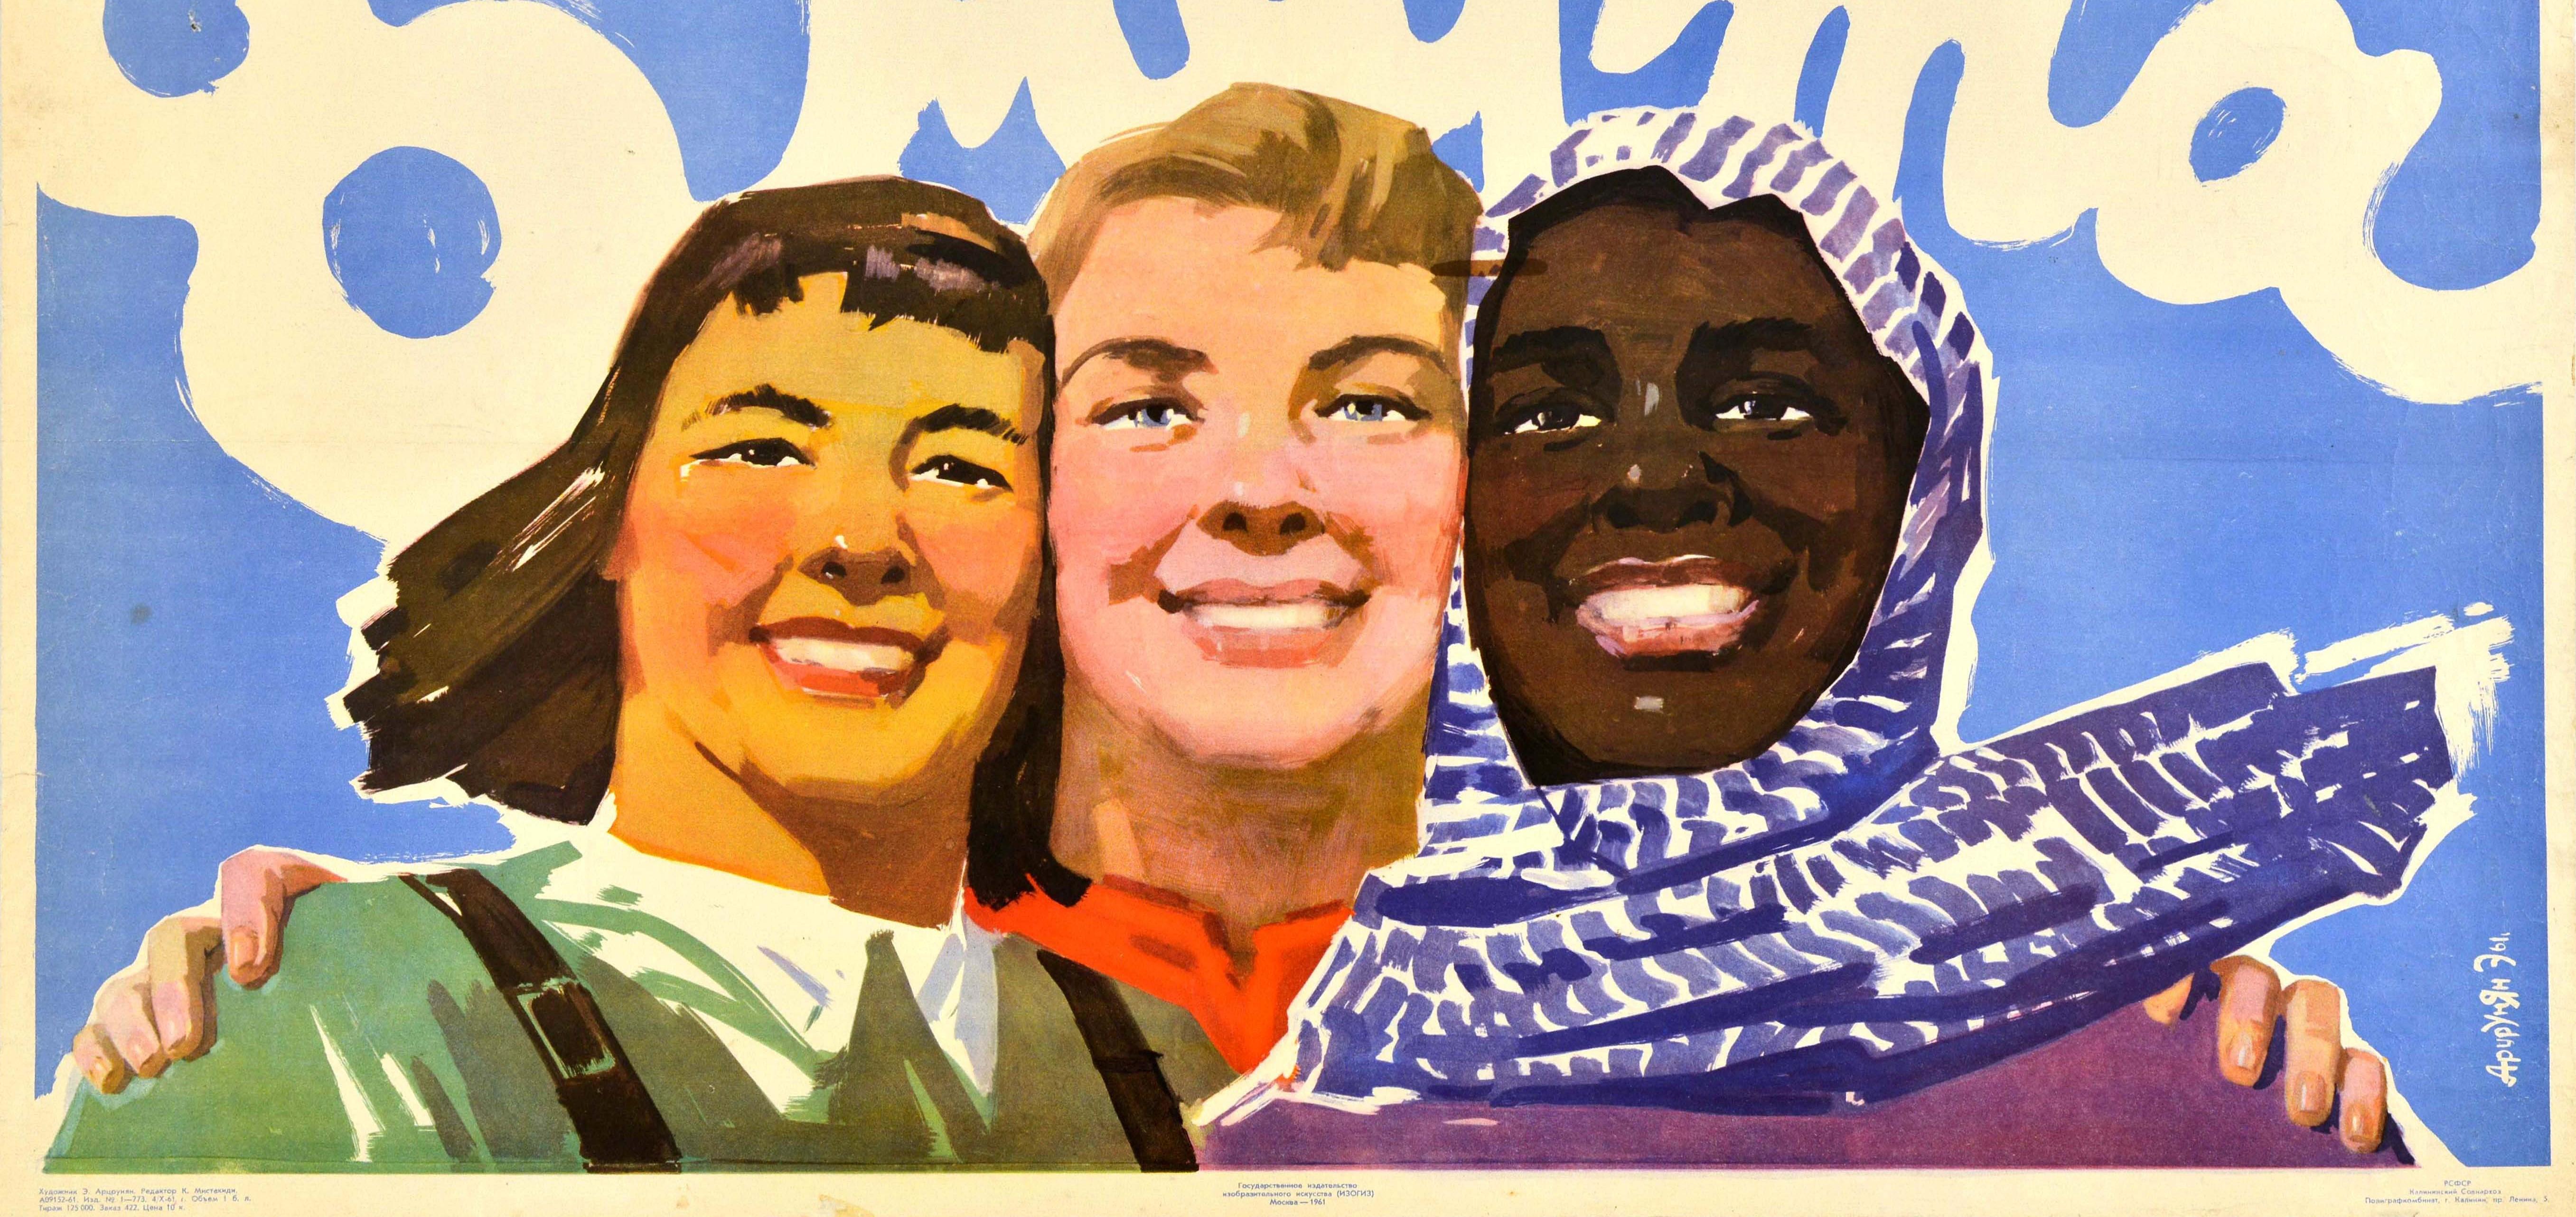 Original vintage Soviet propaganda poster for the International Women's Day celebrations - 8 ????? / 8 March - featuring three ladies smiling to the viewer with the date above against a blue sky background. Starting in New York in February 1909,